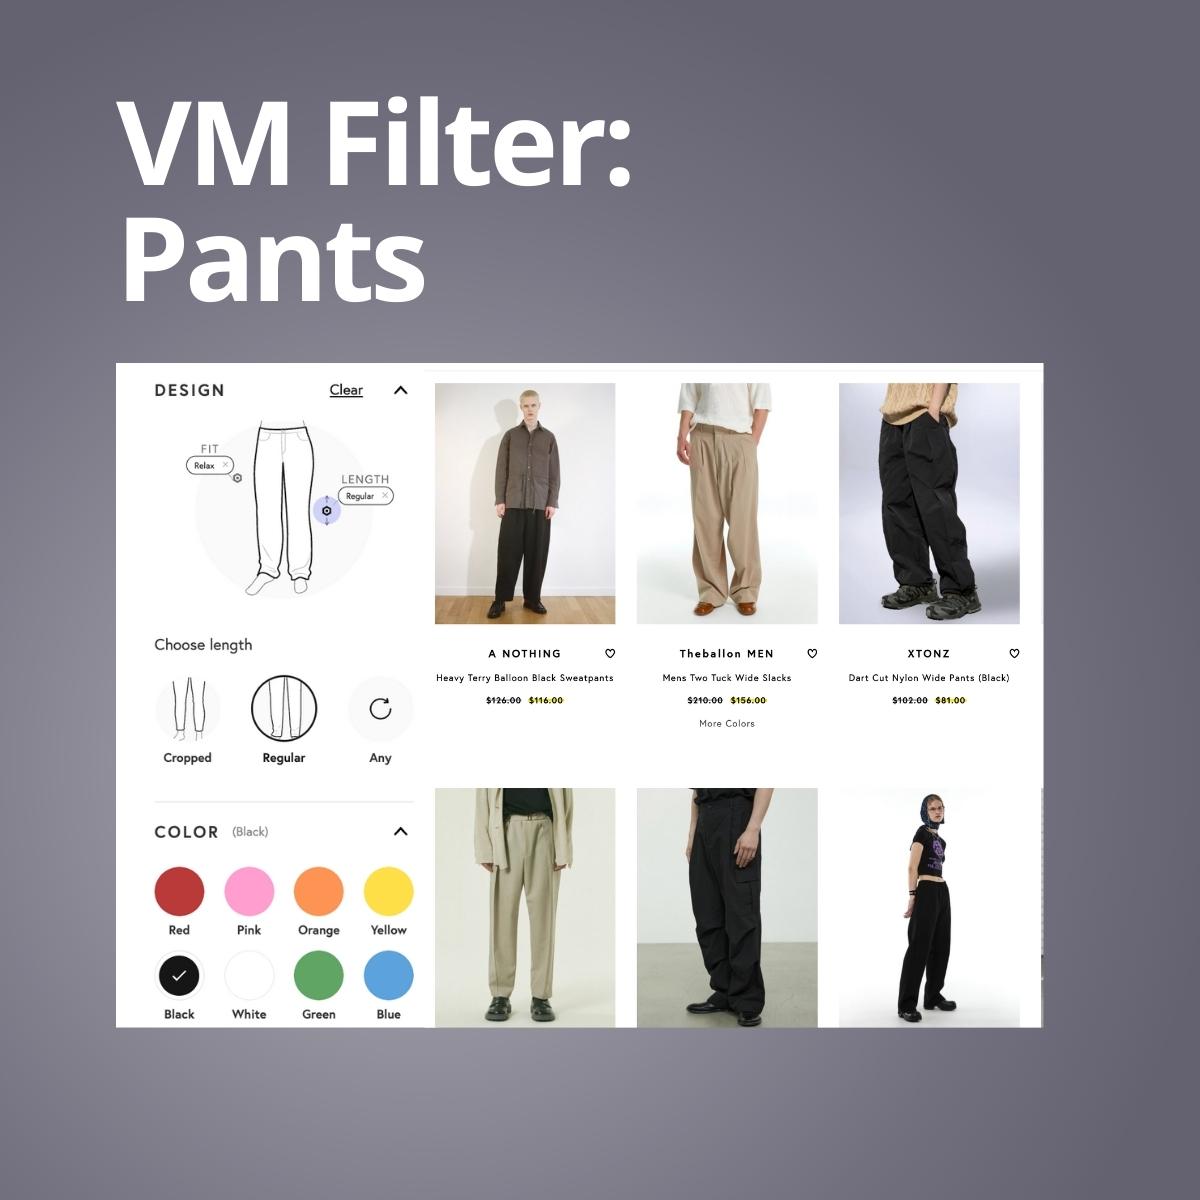 An example of the Virtual mannequin Filter which uses fashion AI to find black pants